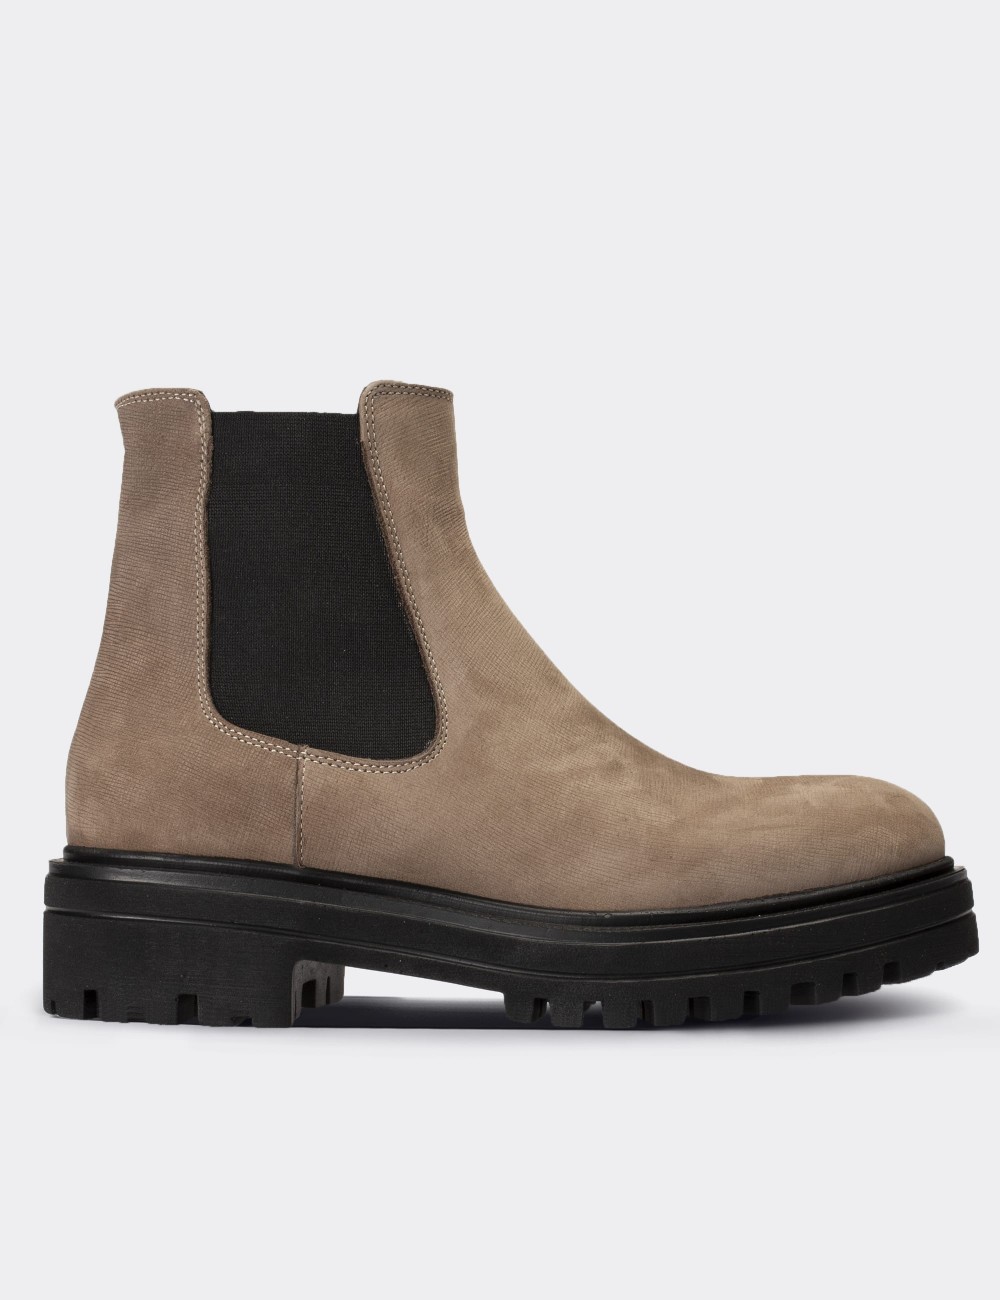 Sandstone Suede Leather Chelsea Boots - 01801ZVZNE01